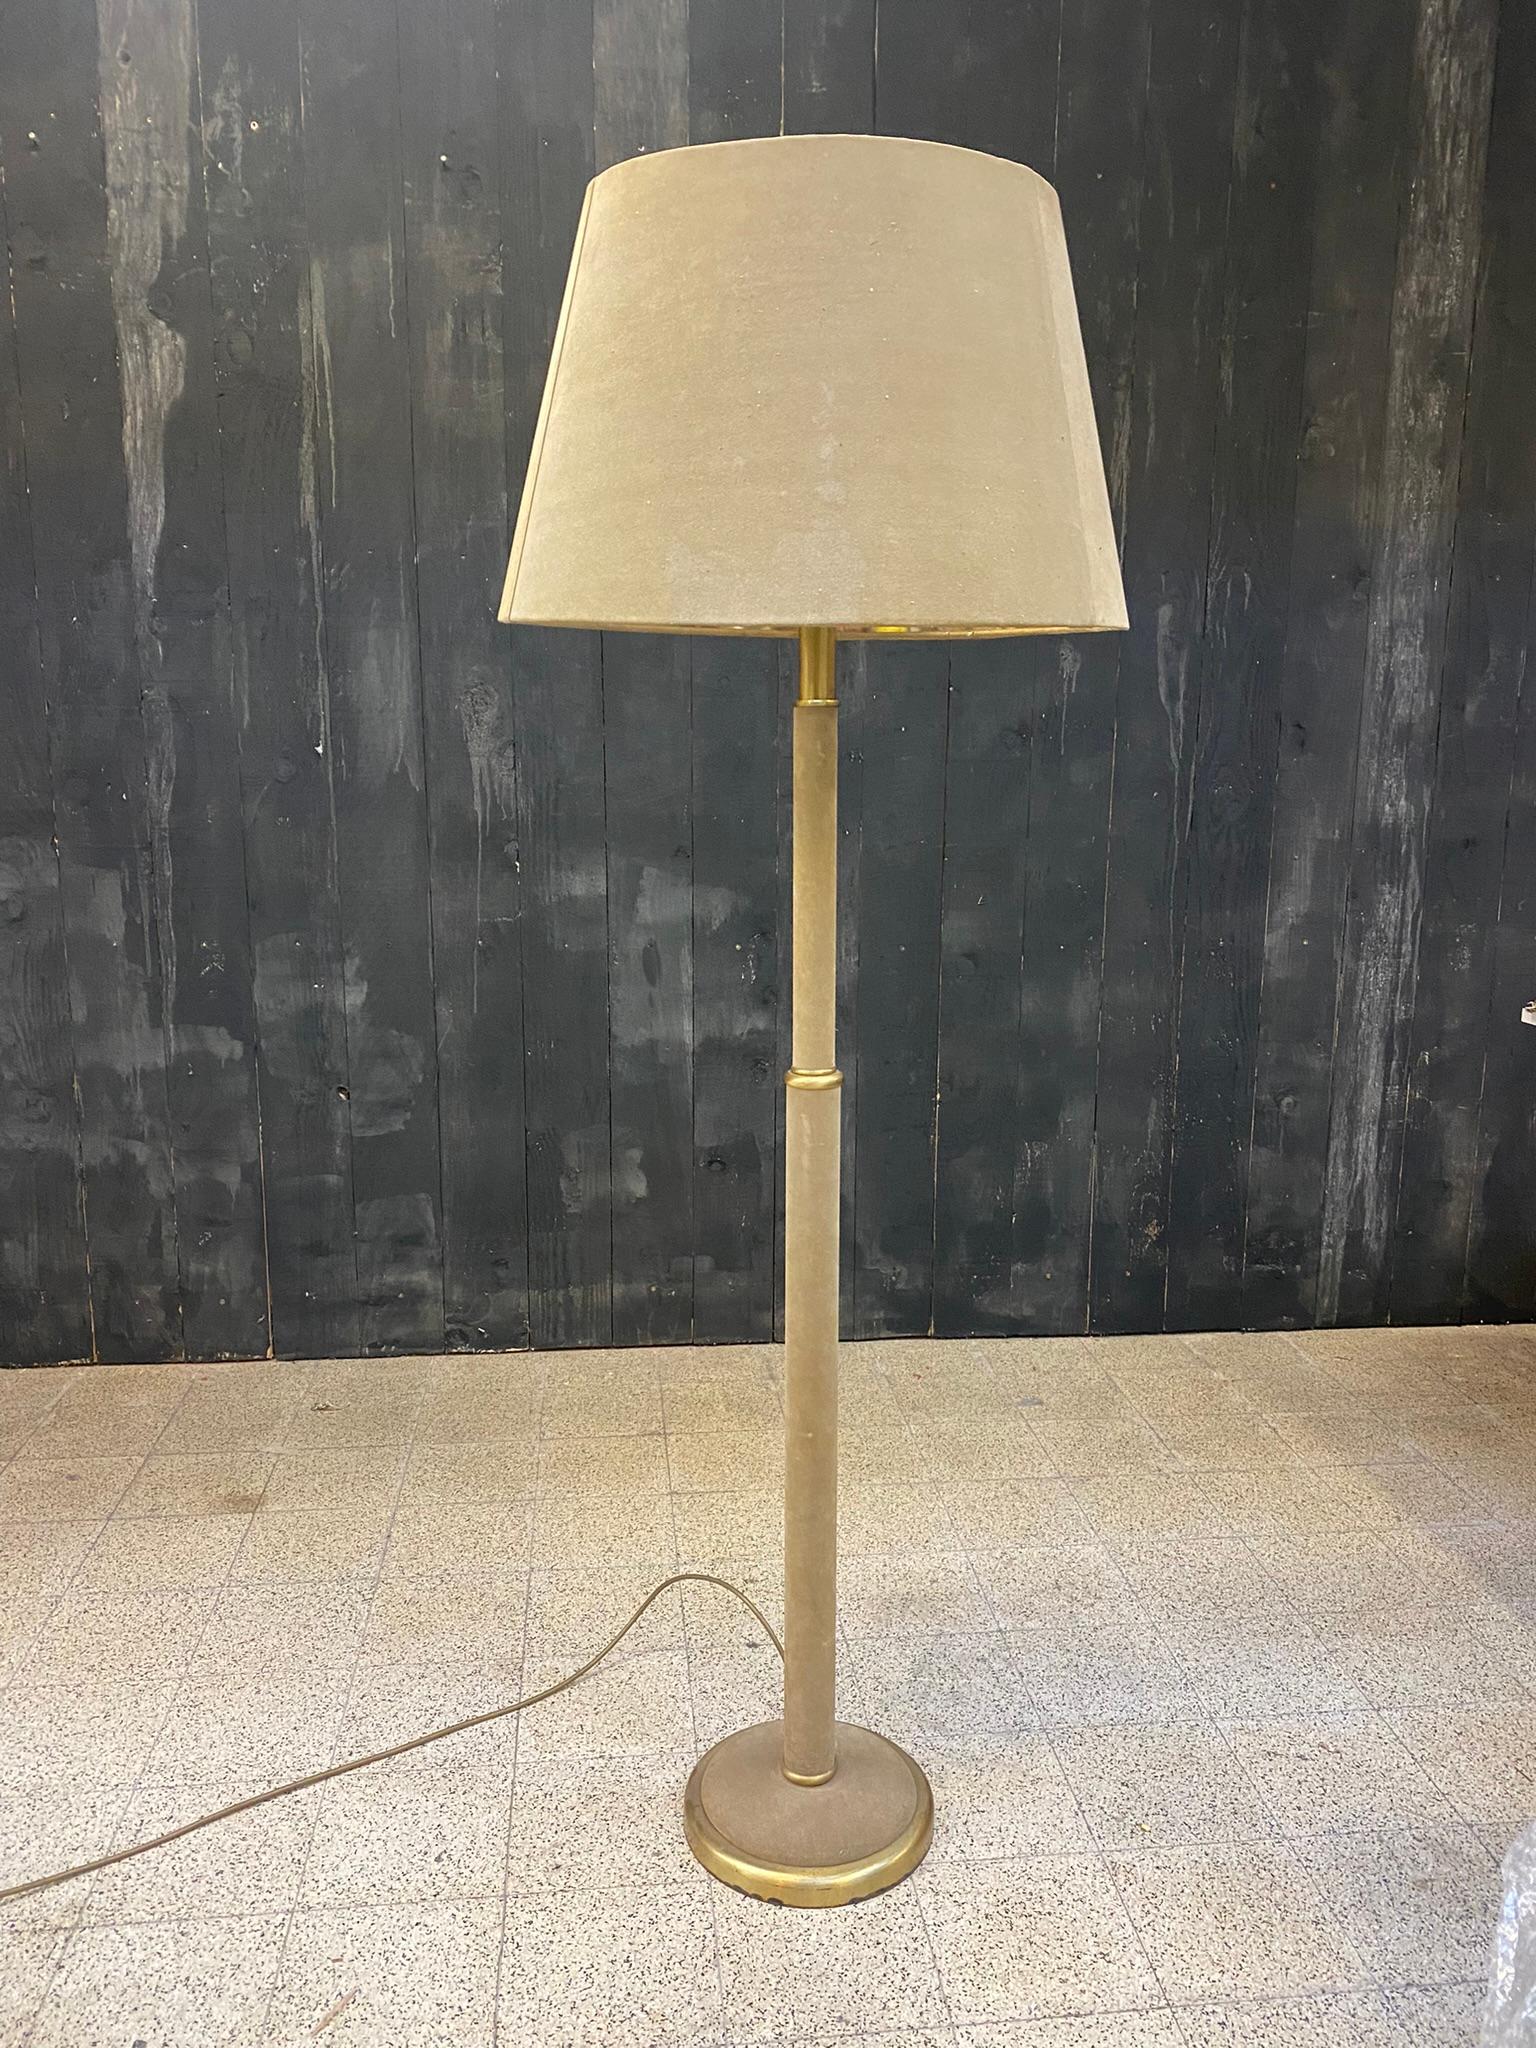 Elegant Floor Lamp in Suede Leather in the Style of Jacques Adnet, circa 1960 For Sale 4